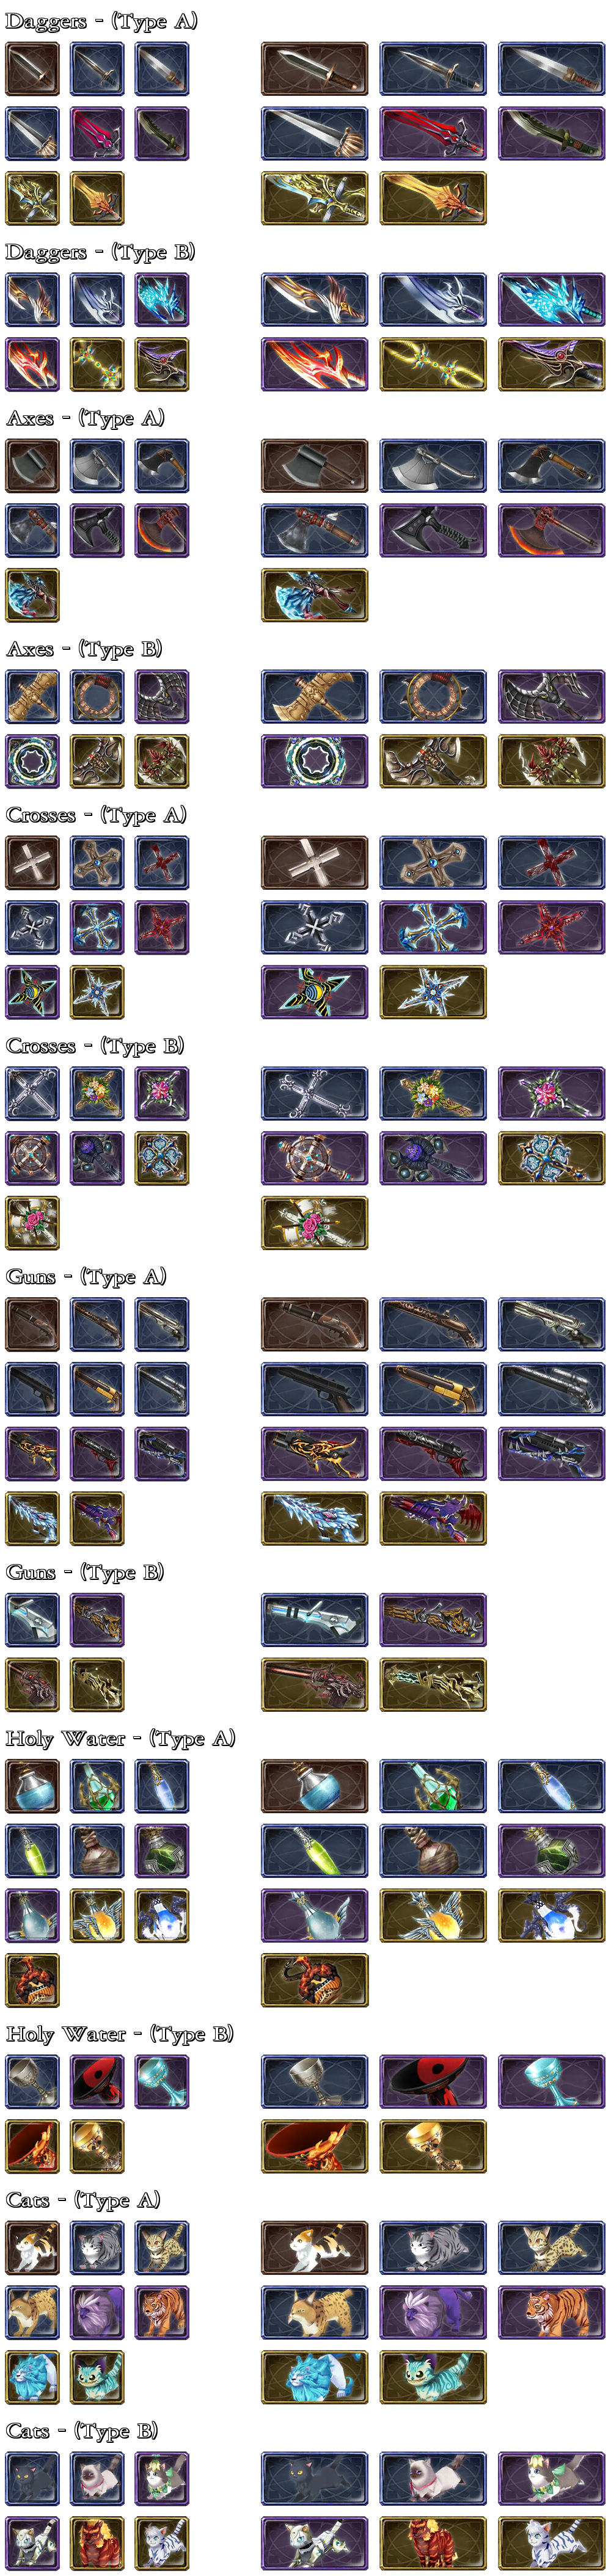 Castlevania: Grimoire of Souls - Sub Weapon Icons